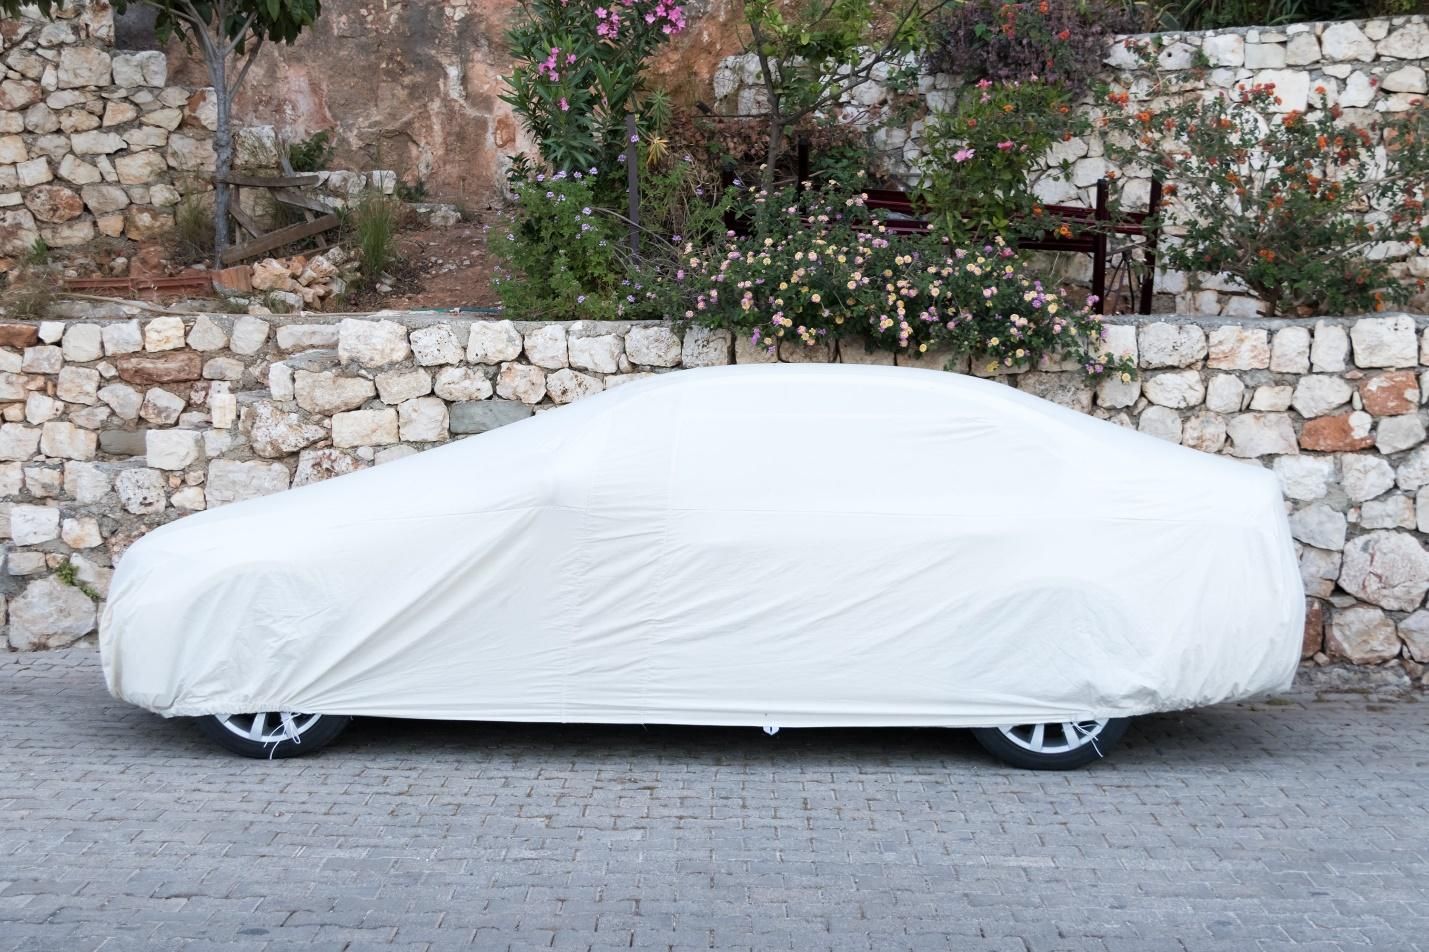 5 Reasons Why You Should Own Multiple Car Covers